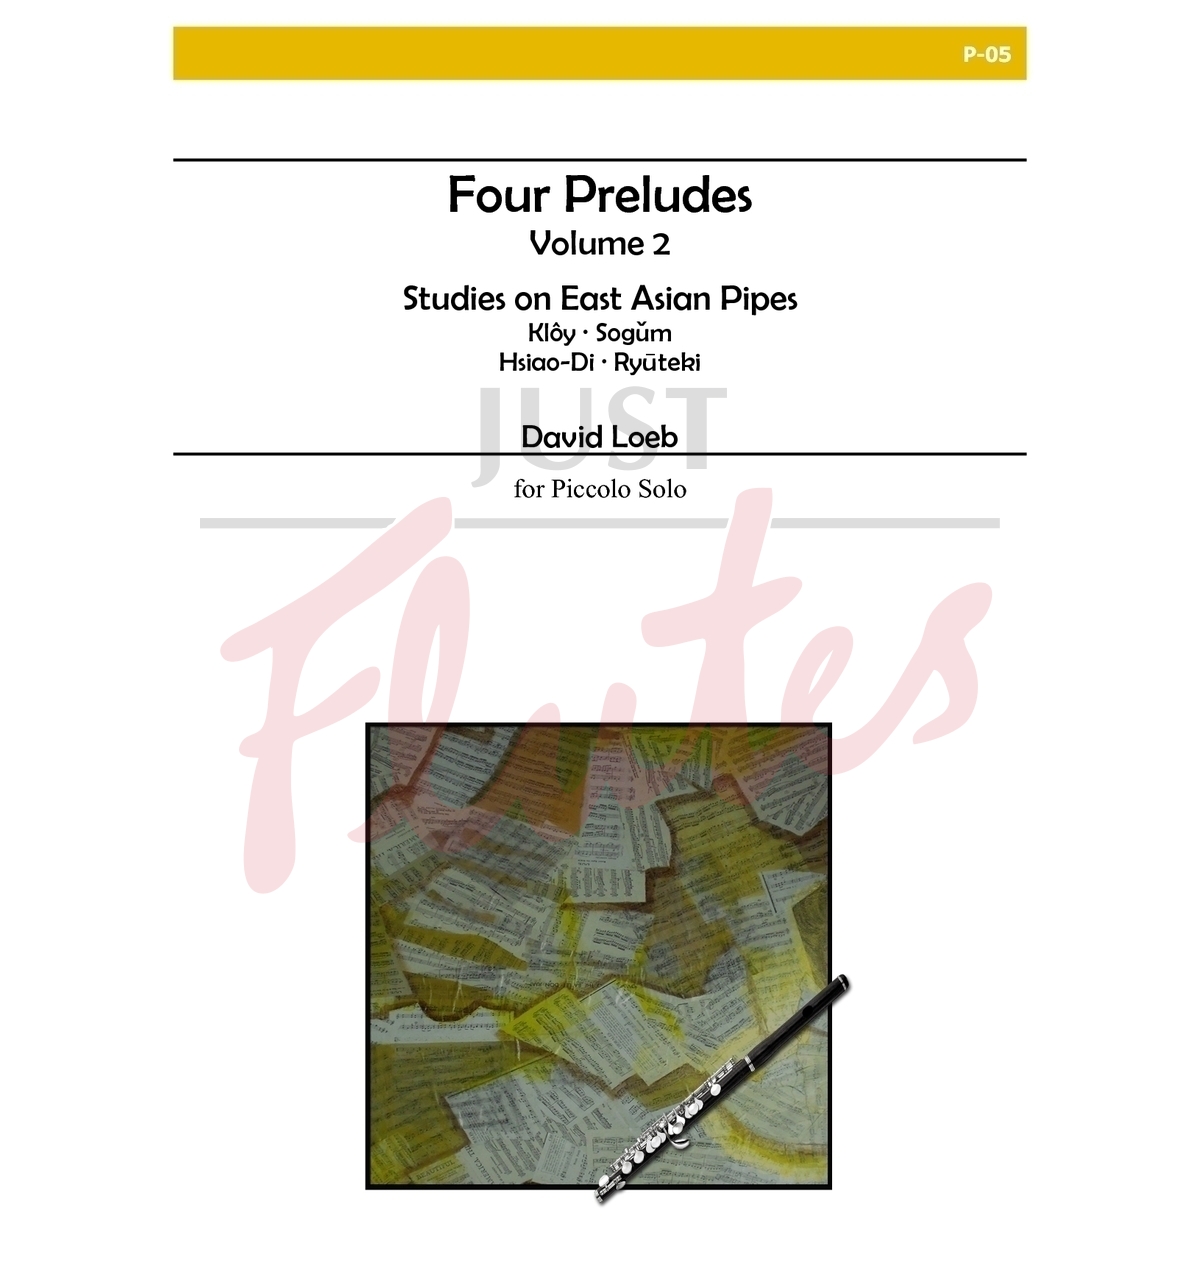 4 Preludes Vol. 2 Studies on East Asian Pipes